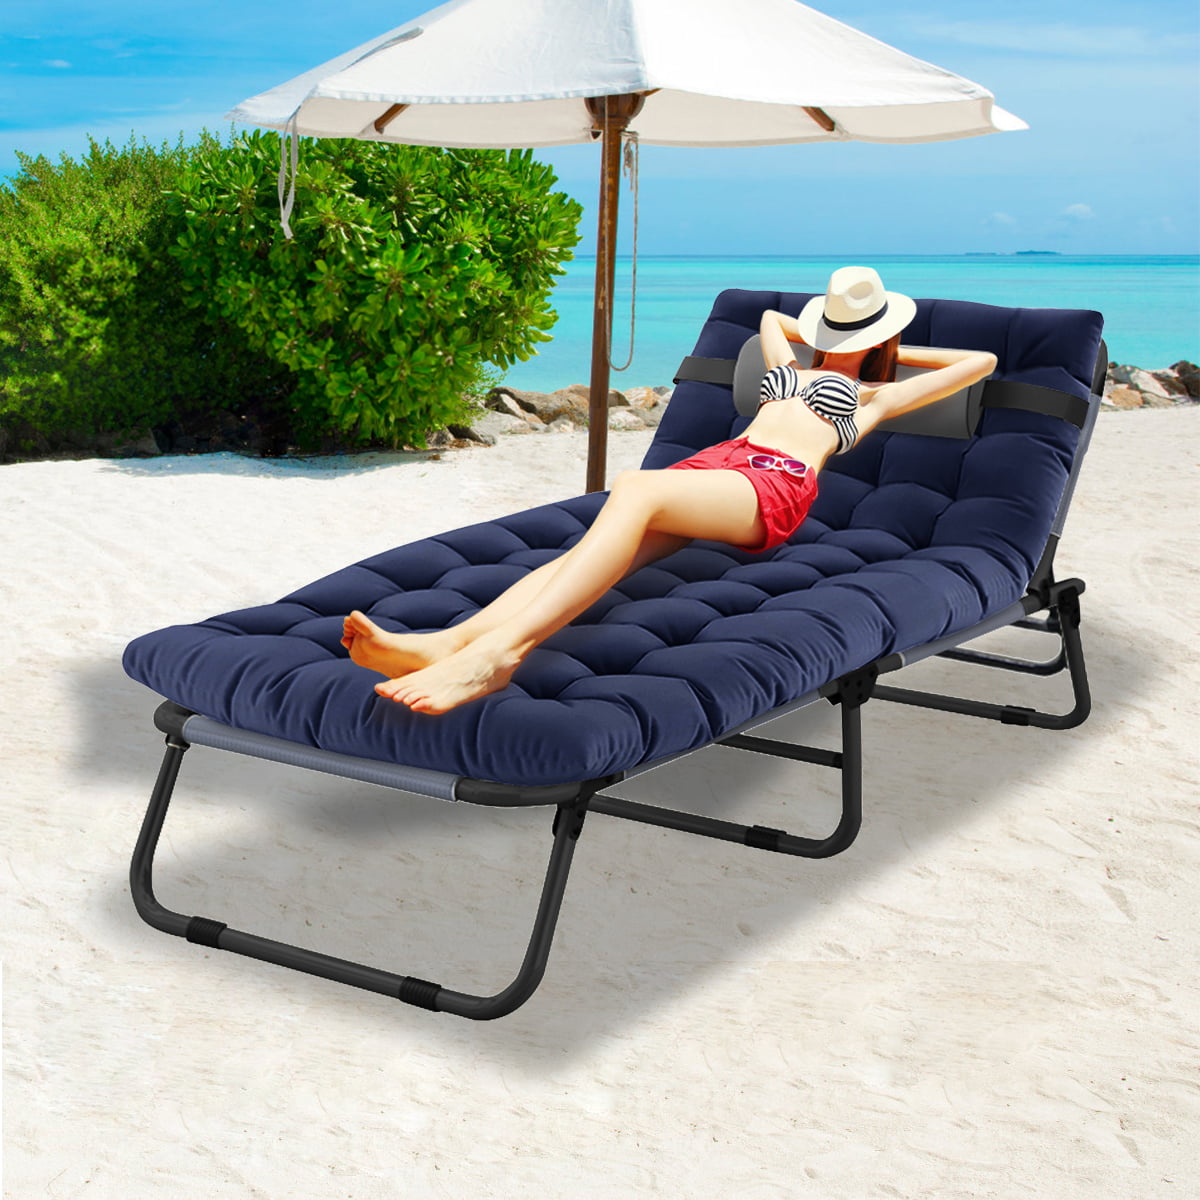 Sunbathing Chairs for Outside SLSY 4-Fold Sleeping Cots for Adults Portable Lounge Chair for Beach Lawn Camping Pool Sun Tanning Folding Chaise Lounge Chair Outdoor 